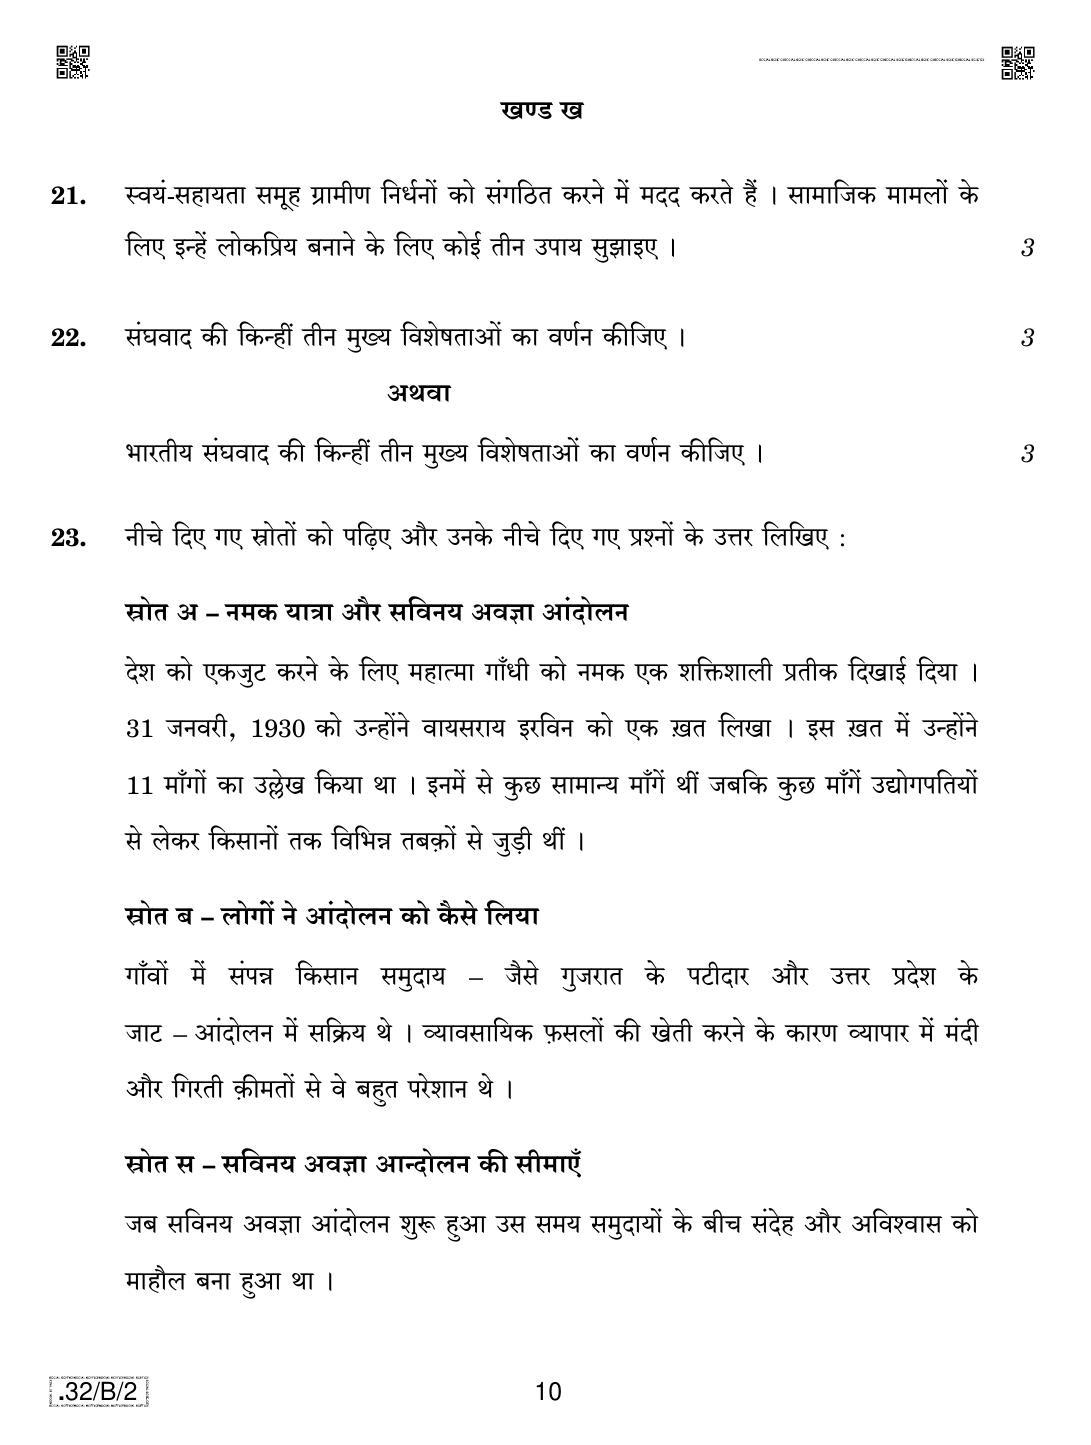 CBSE Class 10 32-C-2 Social Science 2020 Compartment Question Paper - Page 10